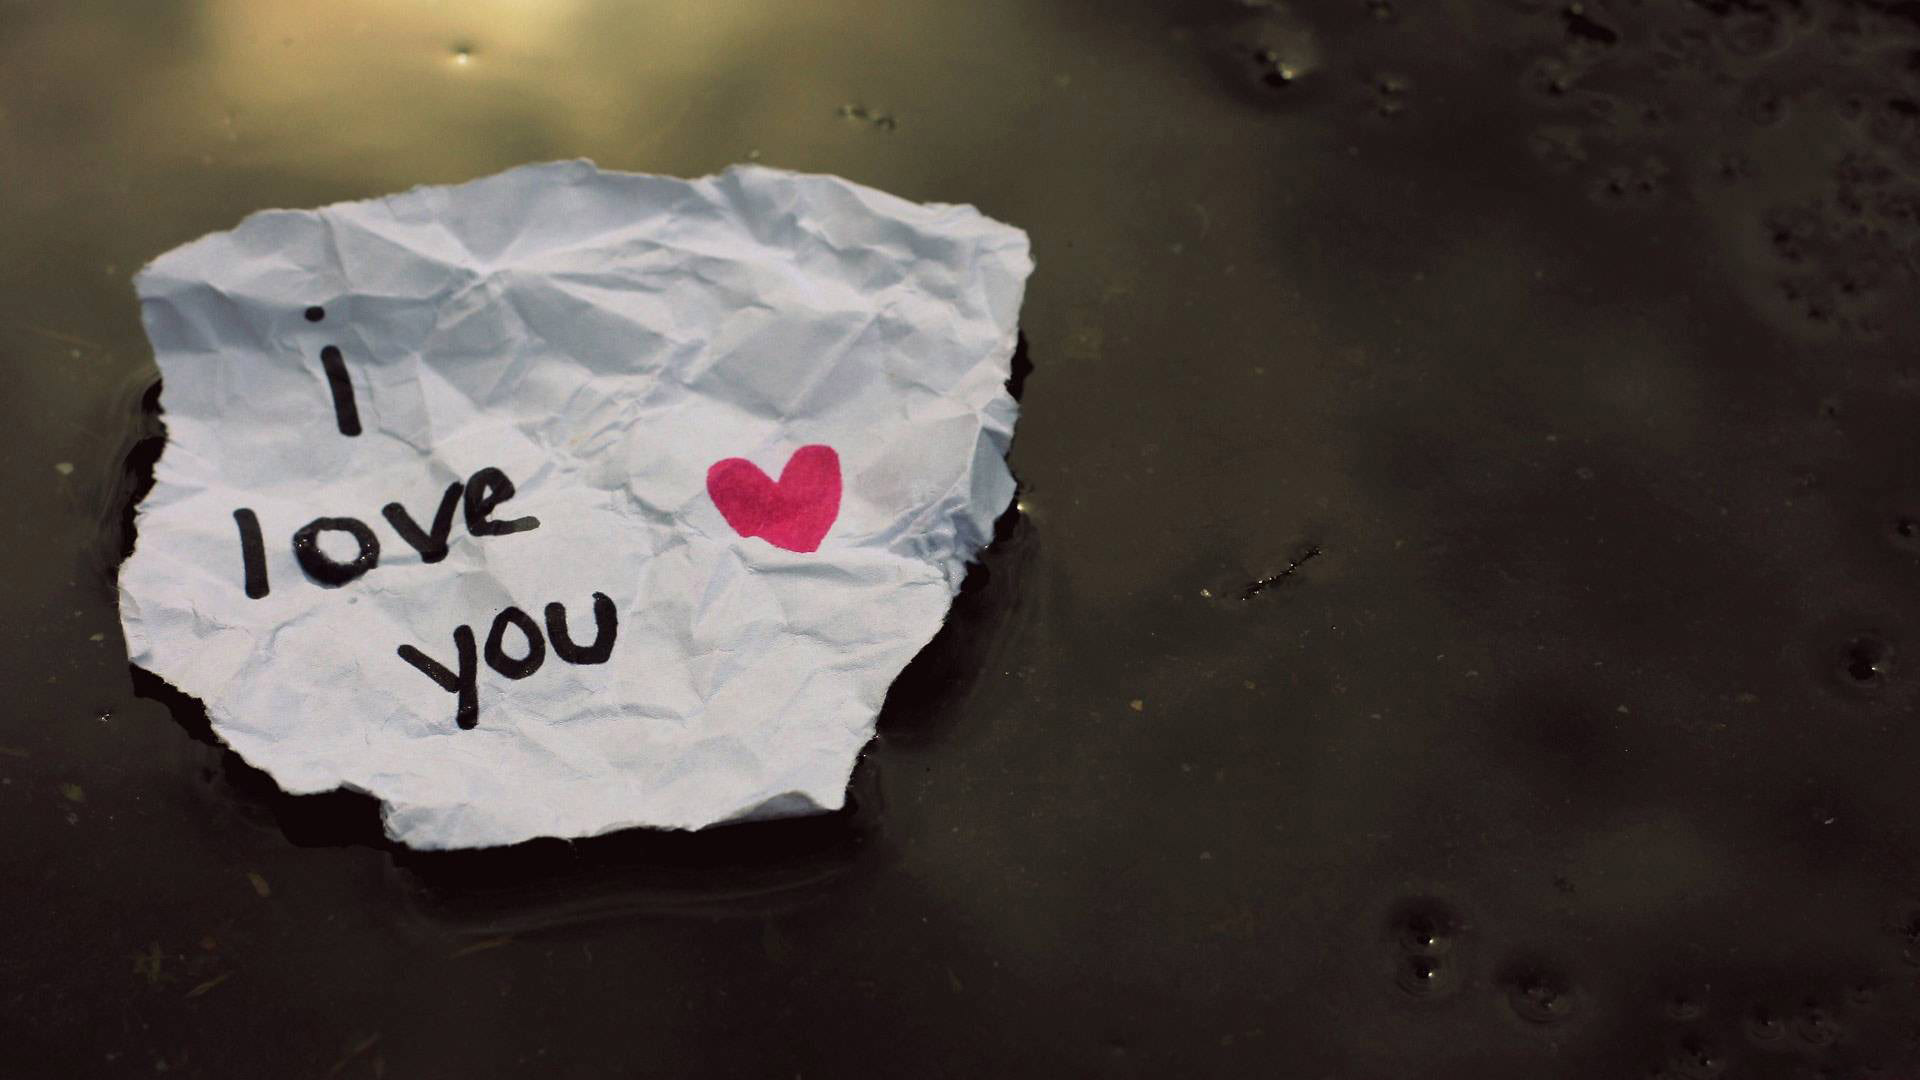 http://www.huntingwithpixels.com/wp-content/uploads/2015/02/love-you-paper.jpg